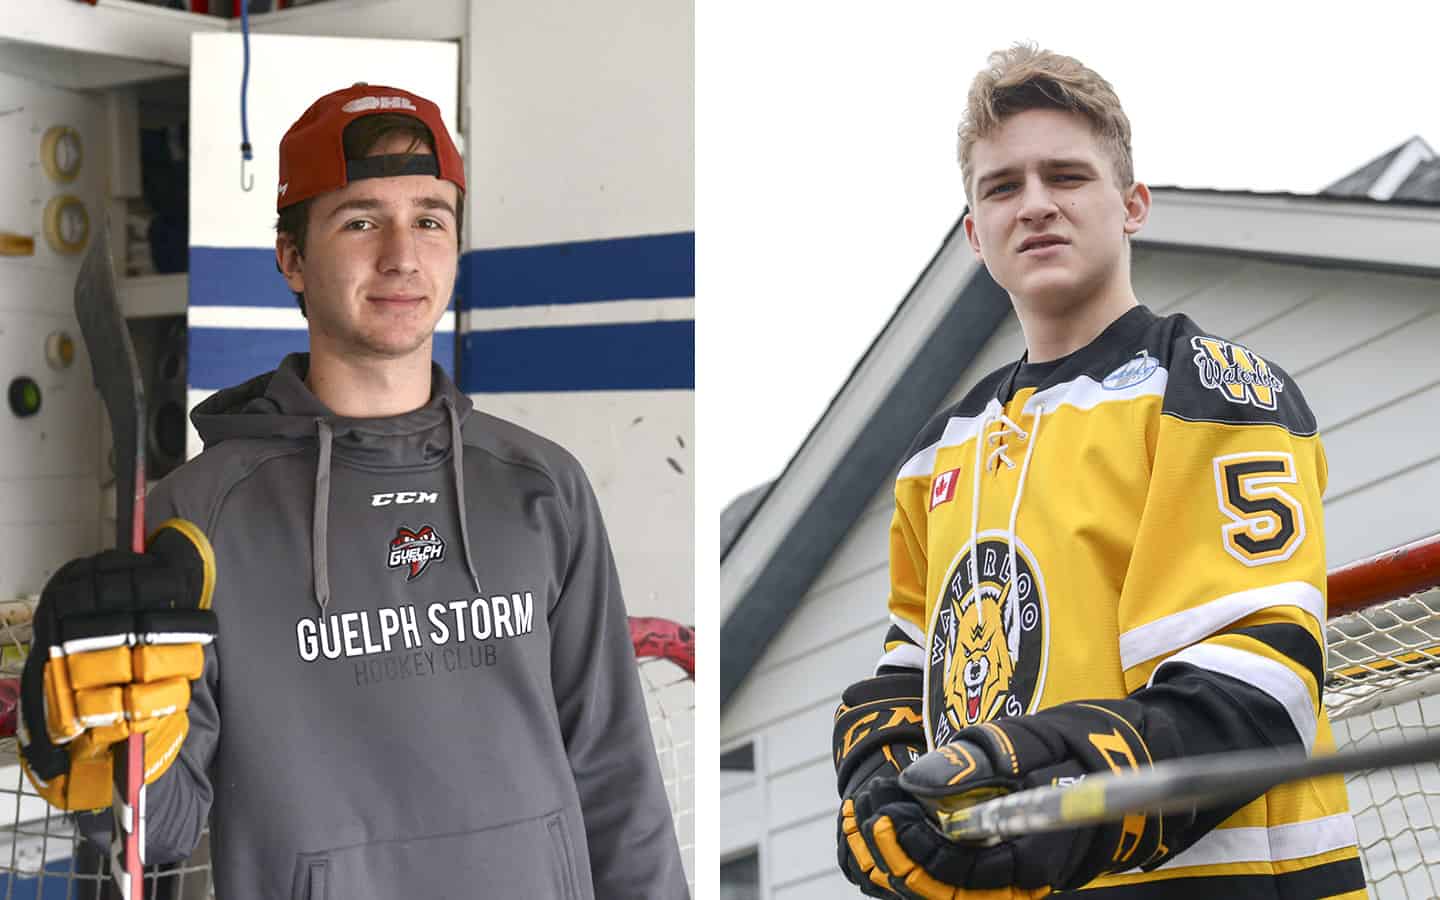 Pair of Elmira players OHL-bound